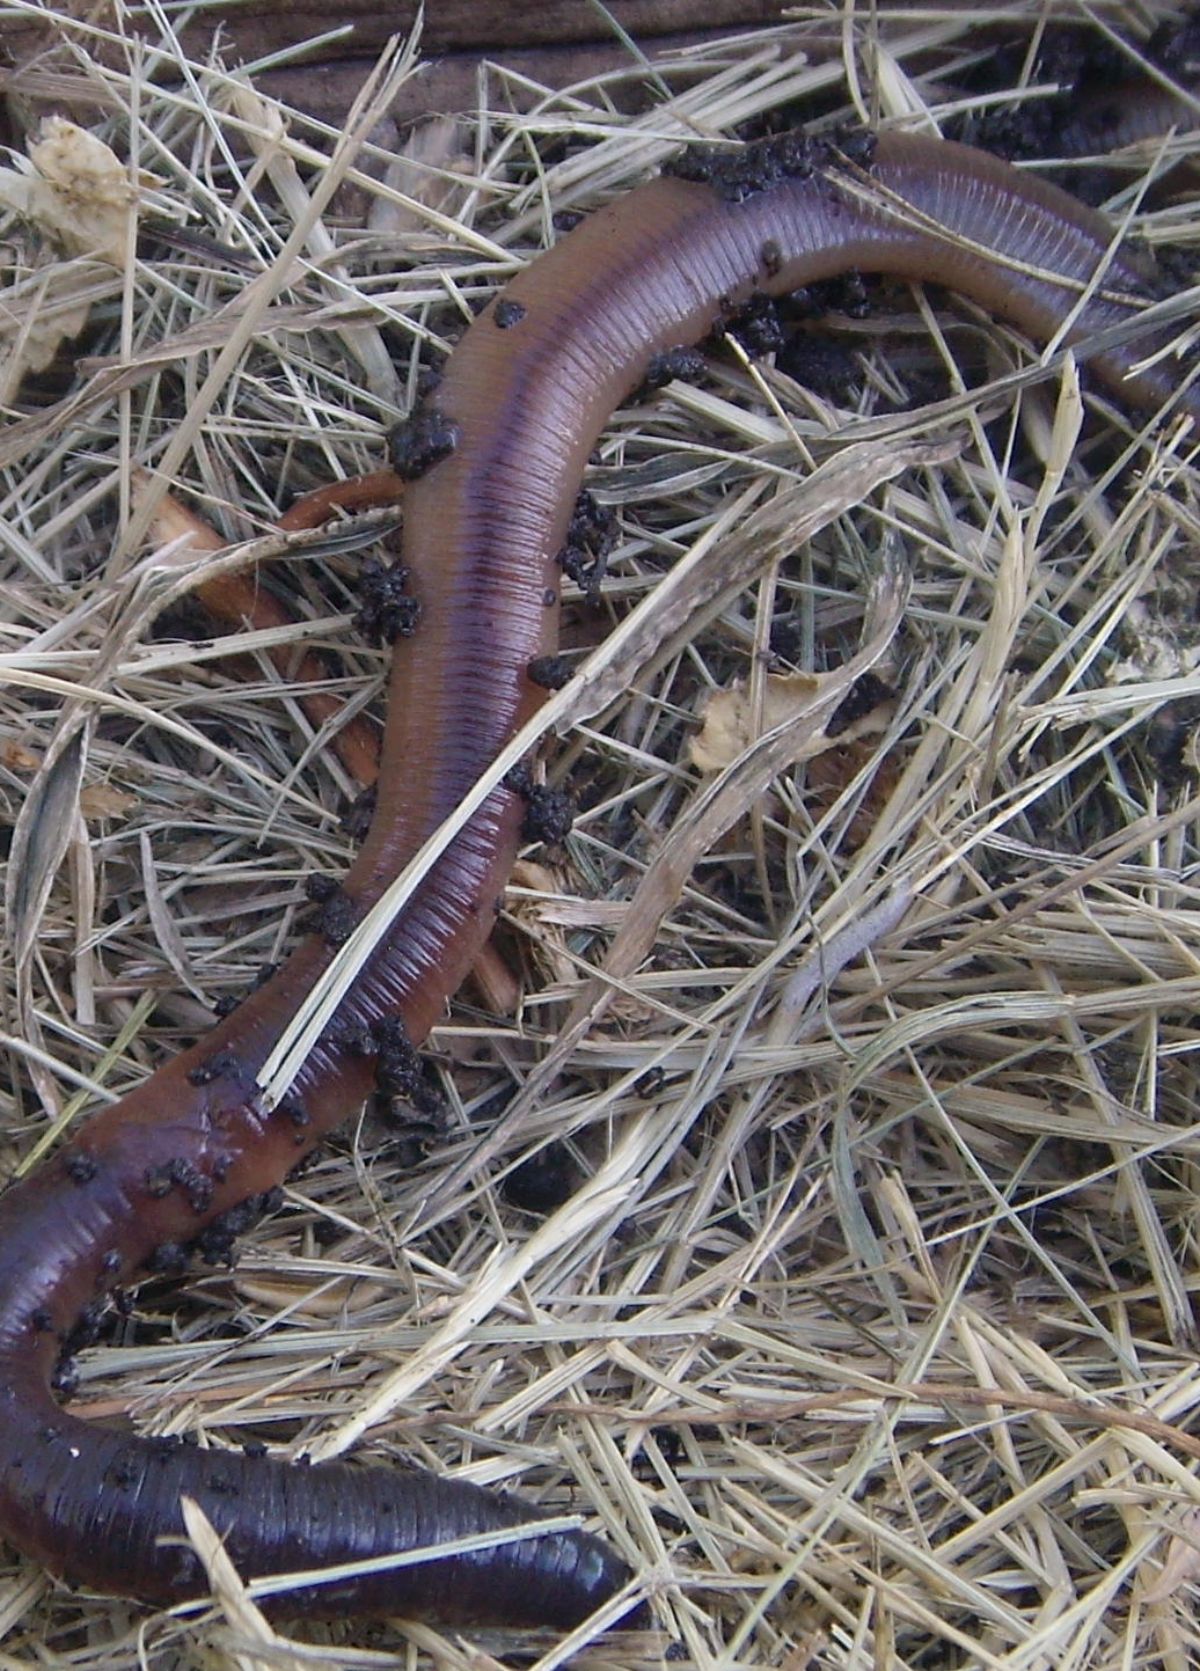 Worms working in soil